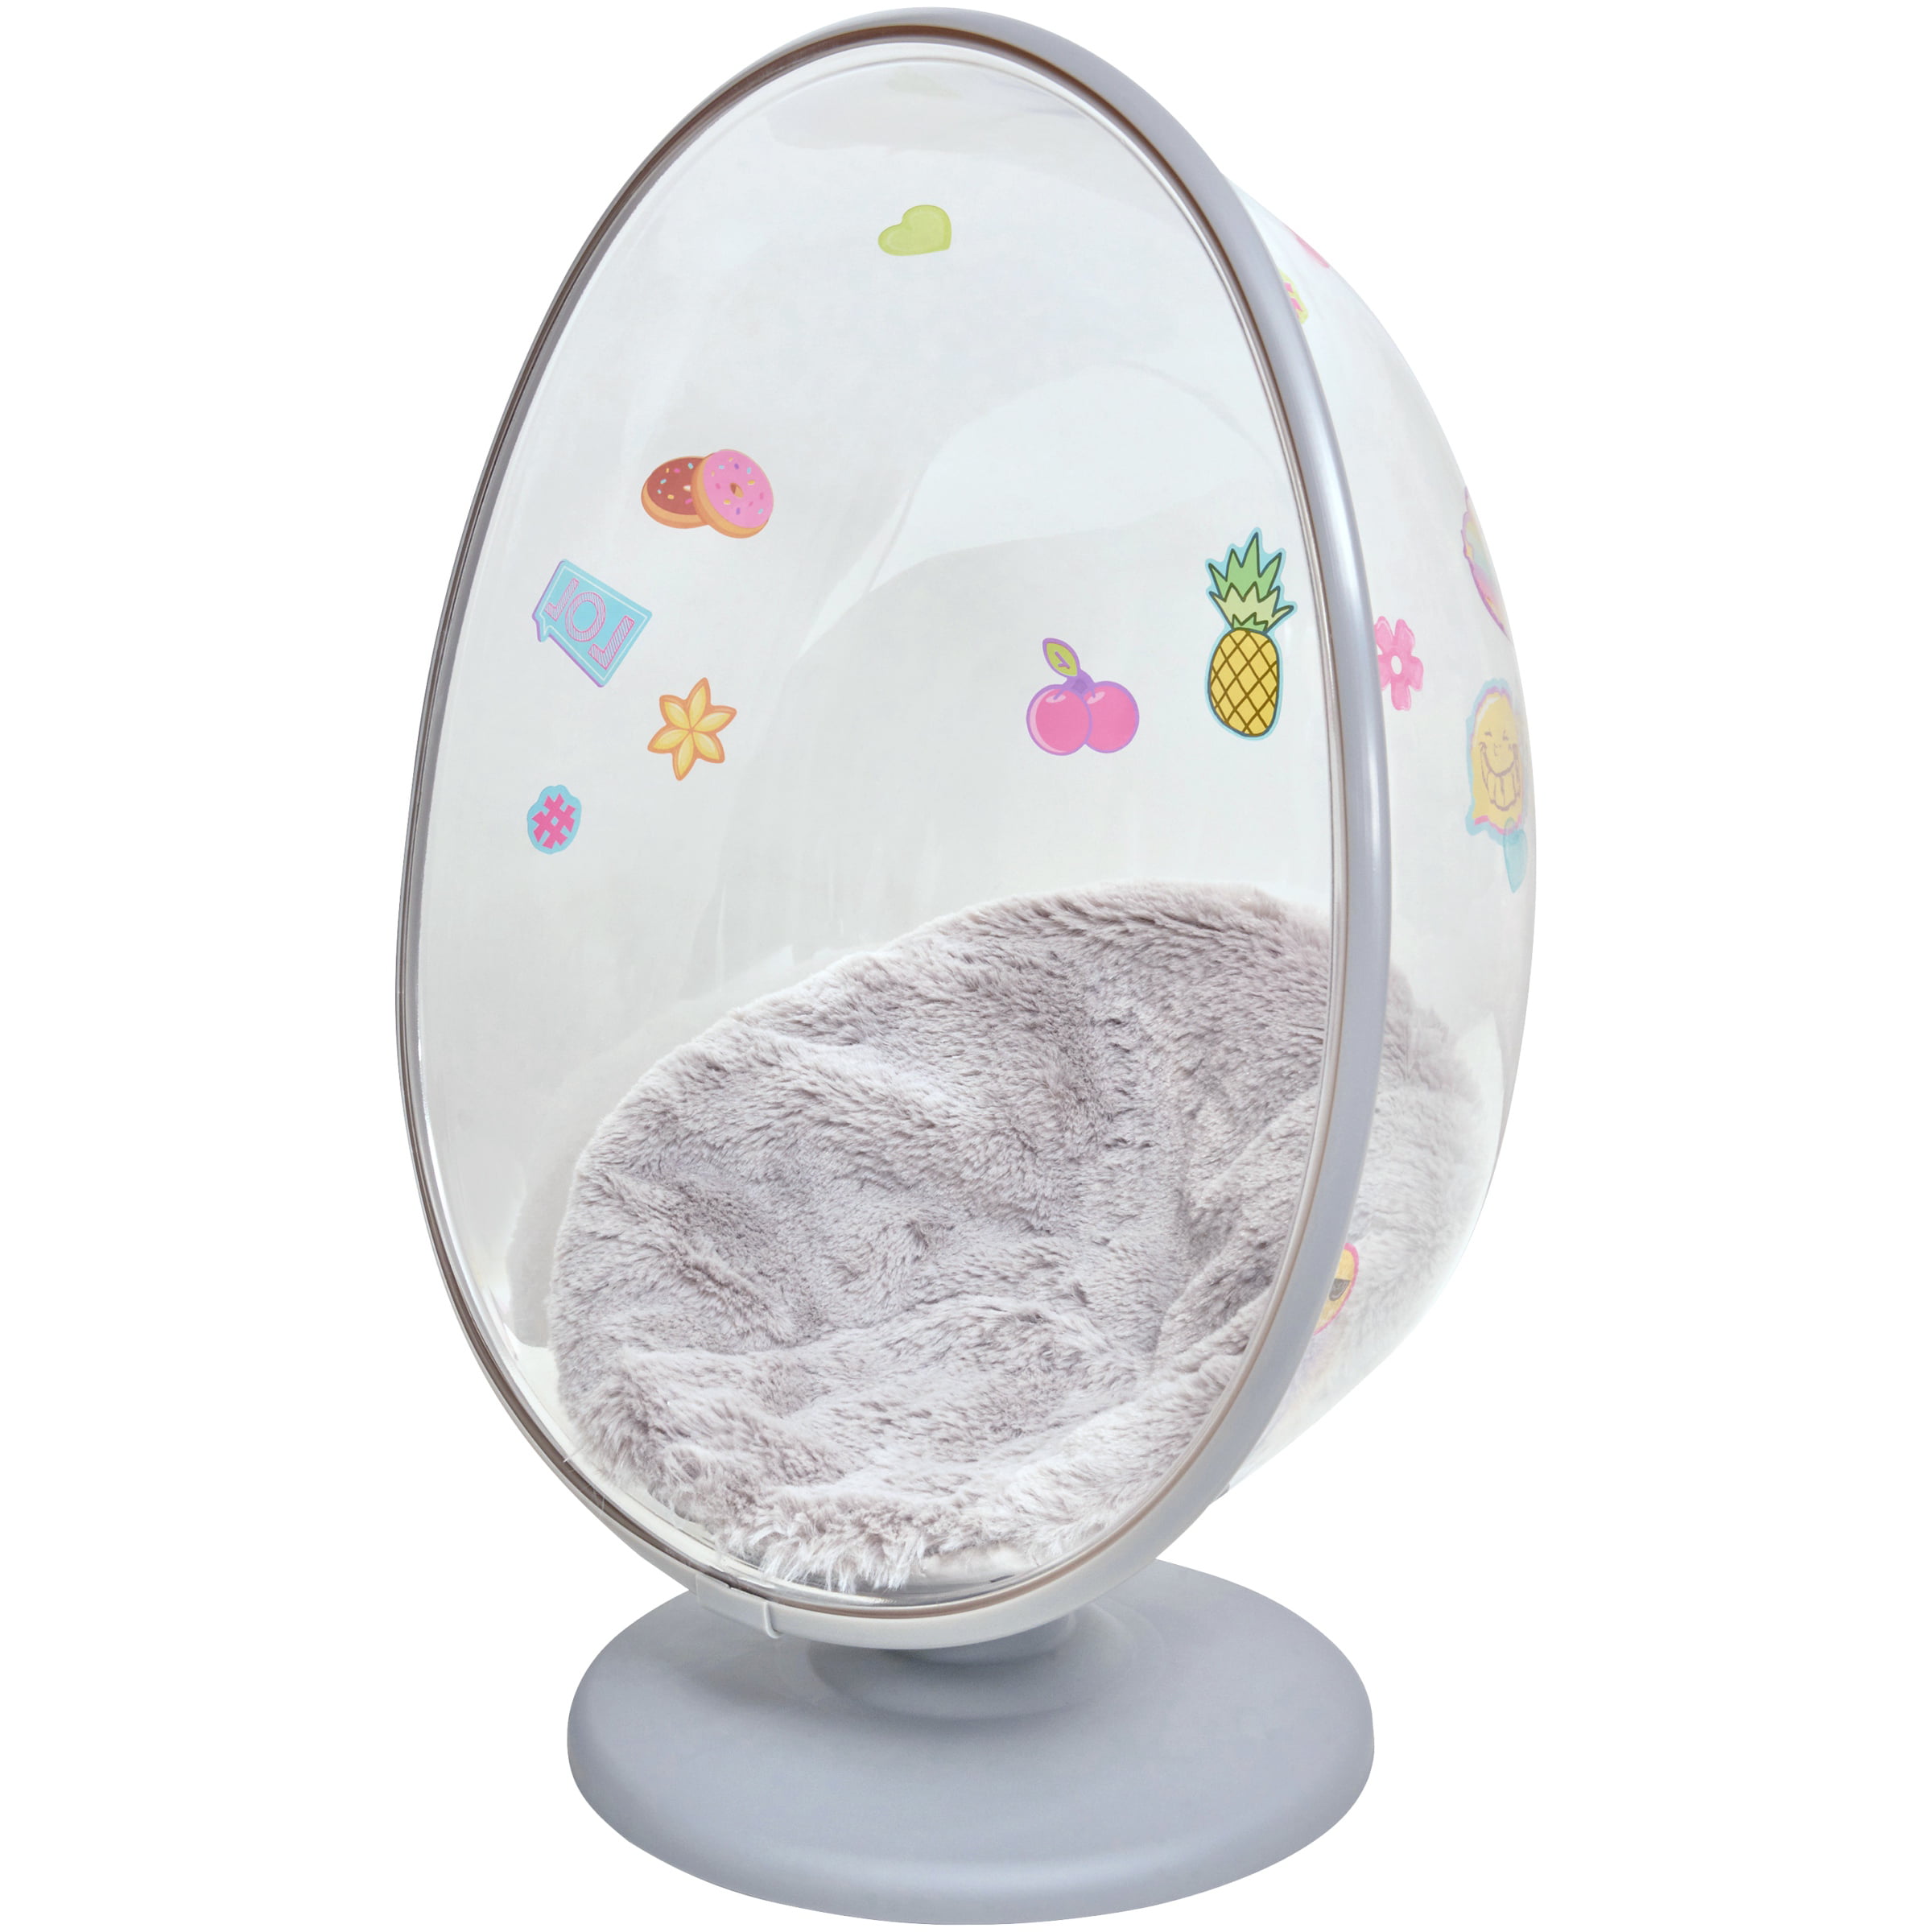 My Life As Egg Chair Translucent Design With Silver Accents Designed For 18 Inch Dolls Walmart Com Walmart Com